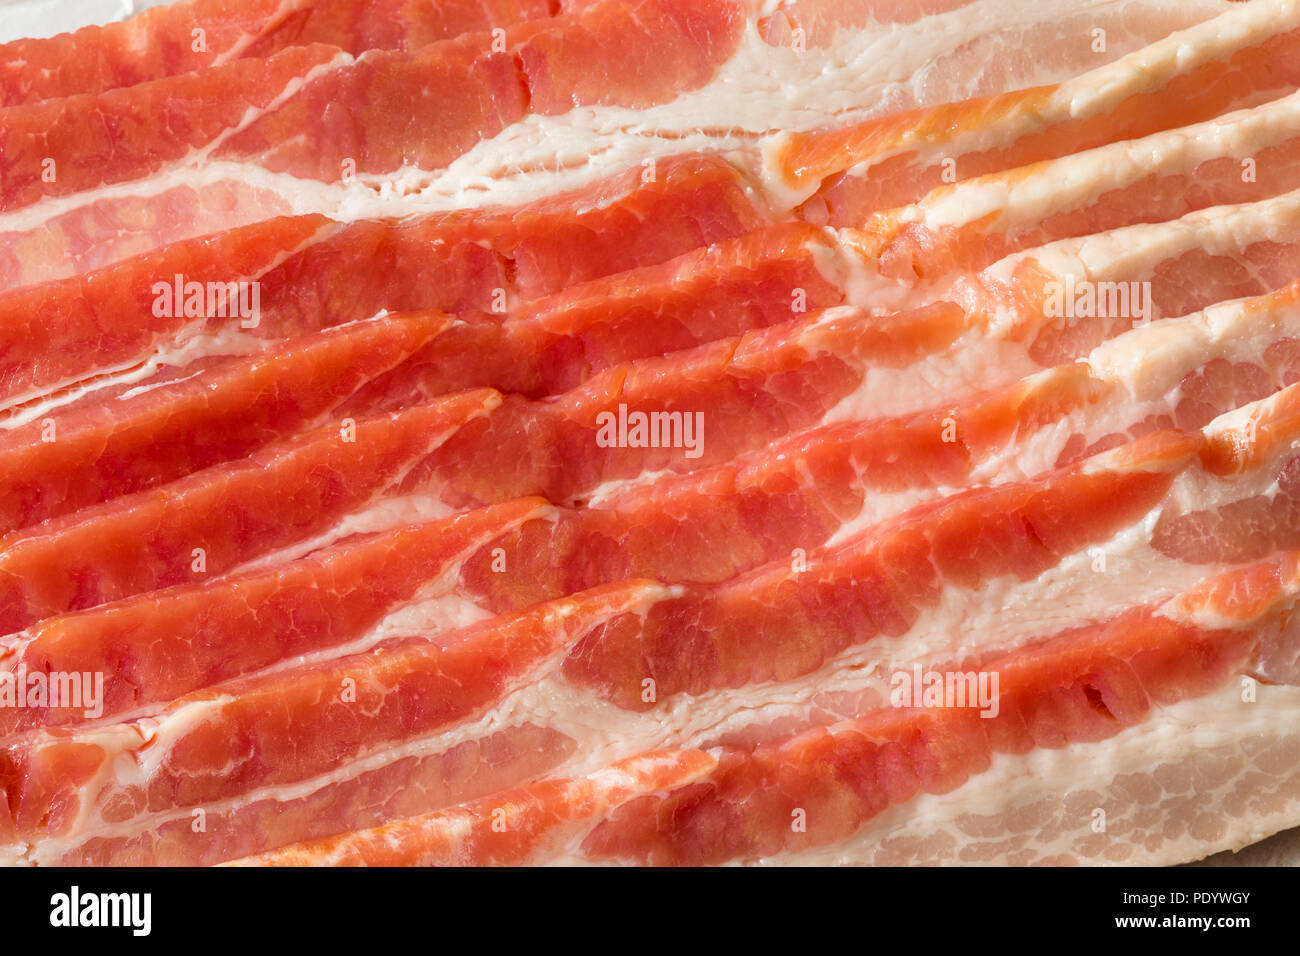 Raw Grass fed Bacon Strips Ready to Cook Stock Photo